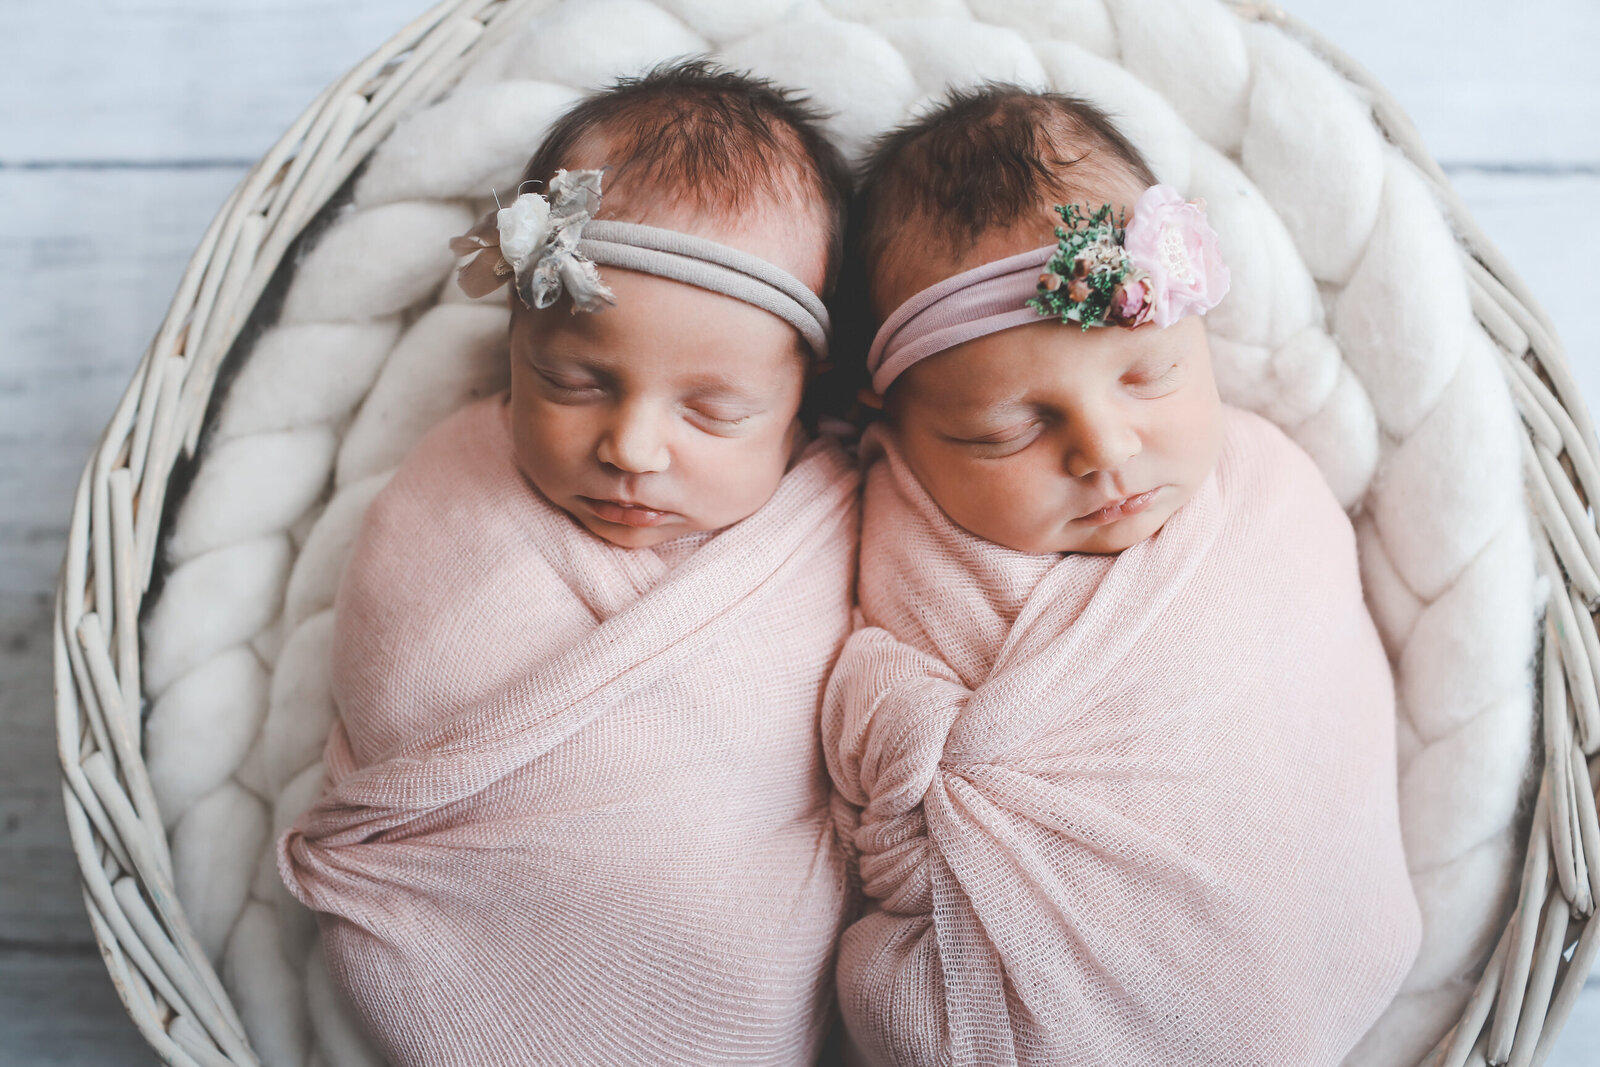 NBP-NEWBORN-TWINS-WRAPPED-WITH-HEADBANDS-0024